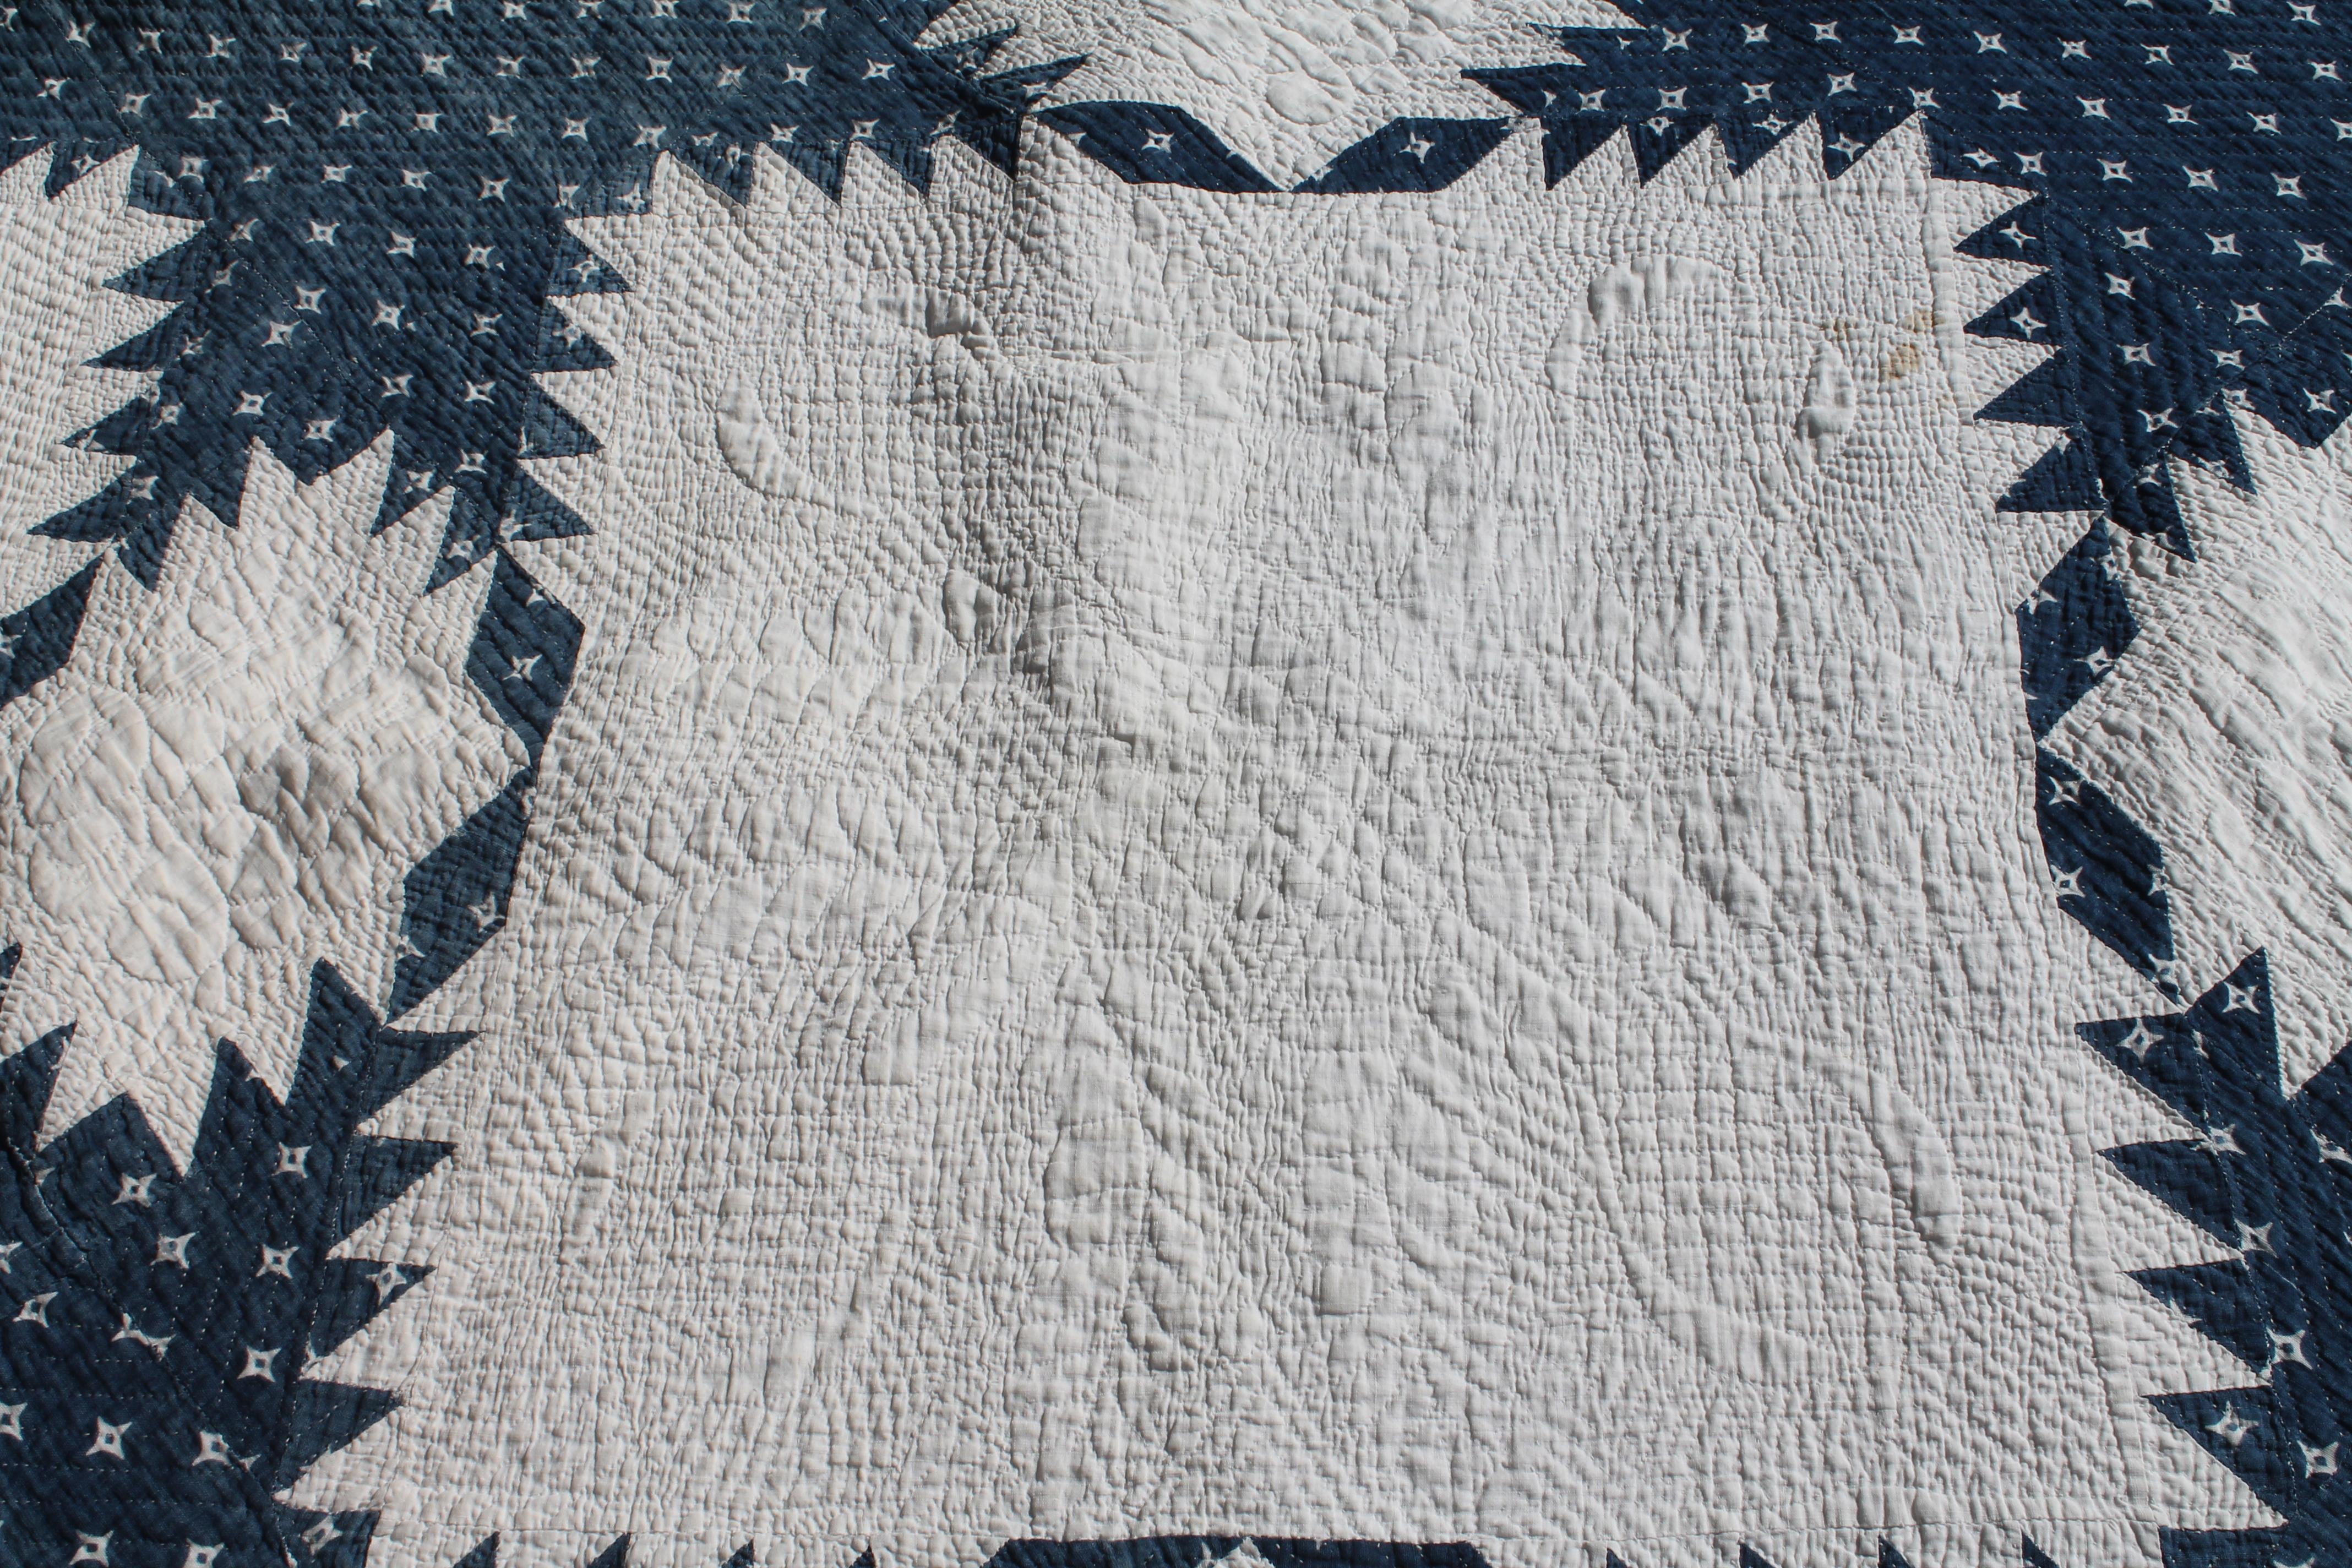 Hand-Crafted 19thc Fine Blue & White Feathered Star Quilt